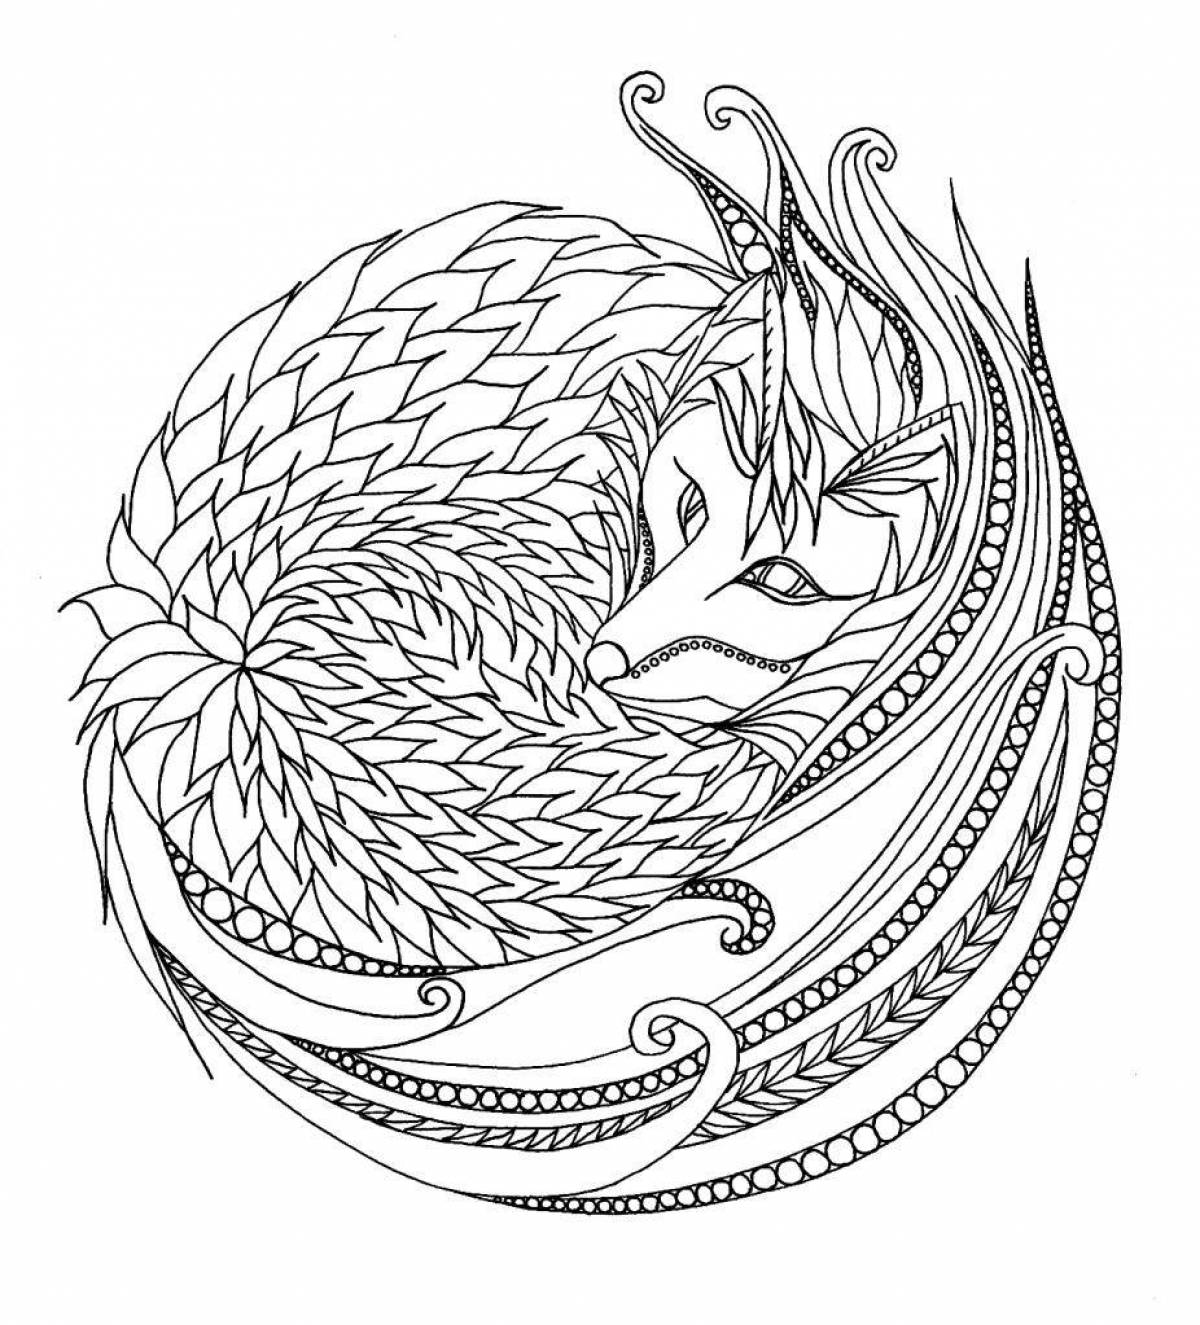 Elegant fox coloring book for adults